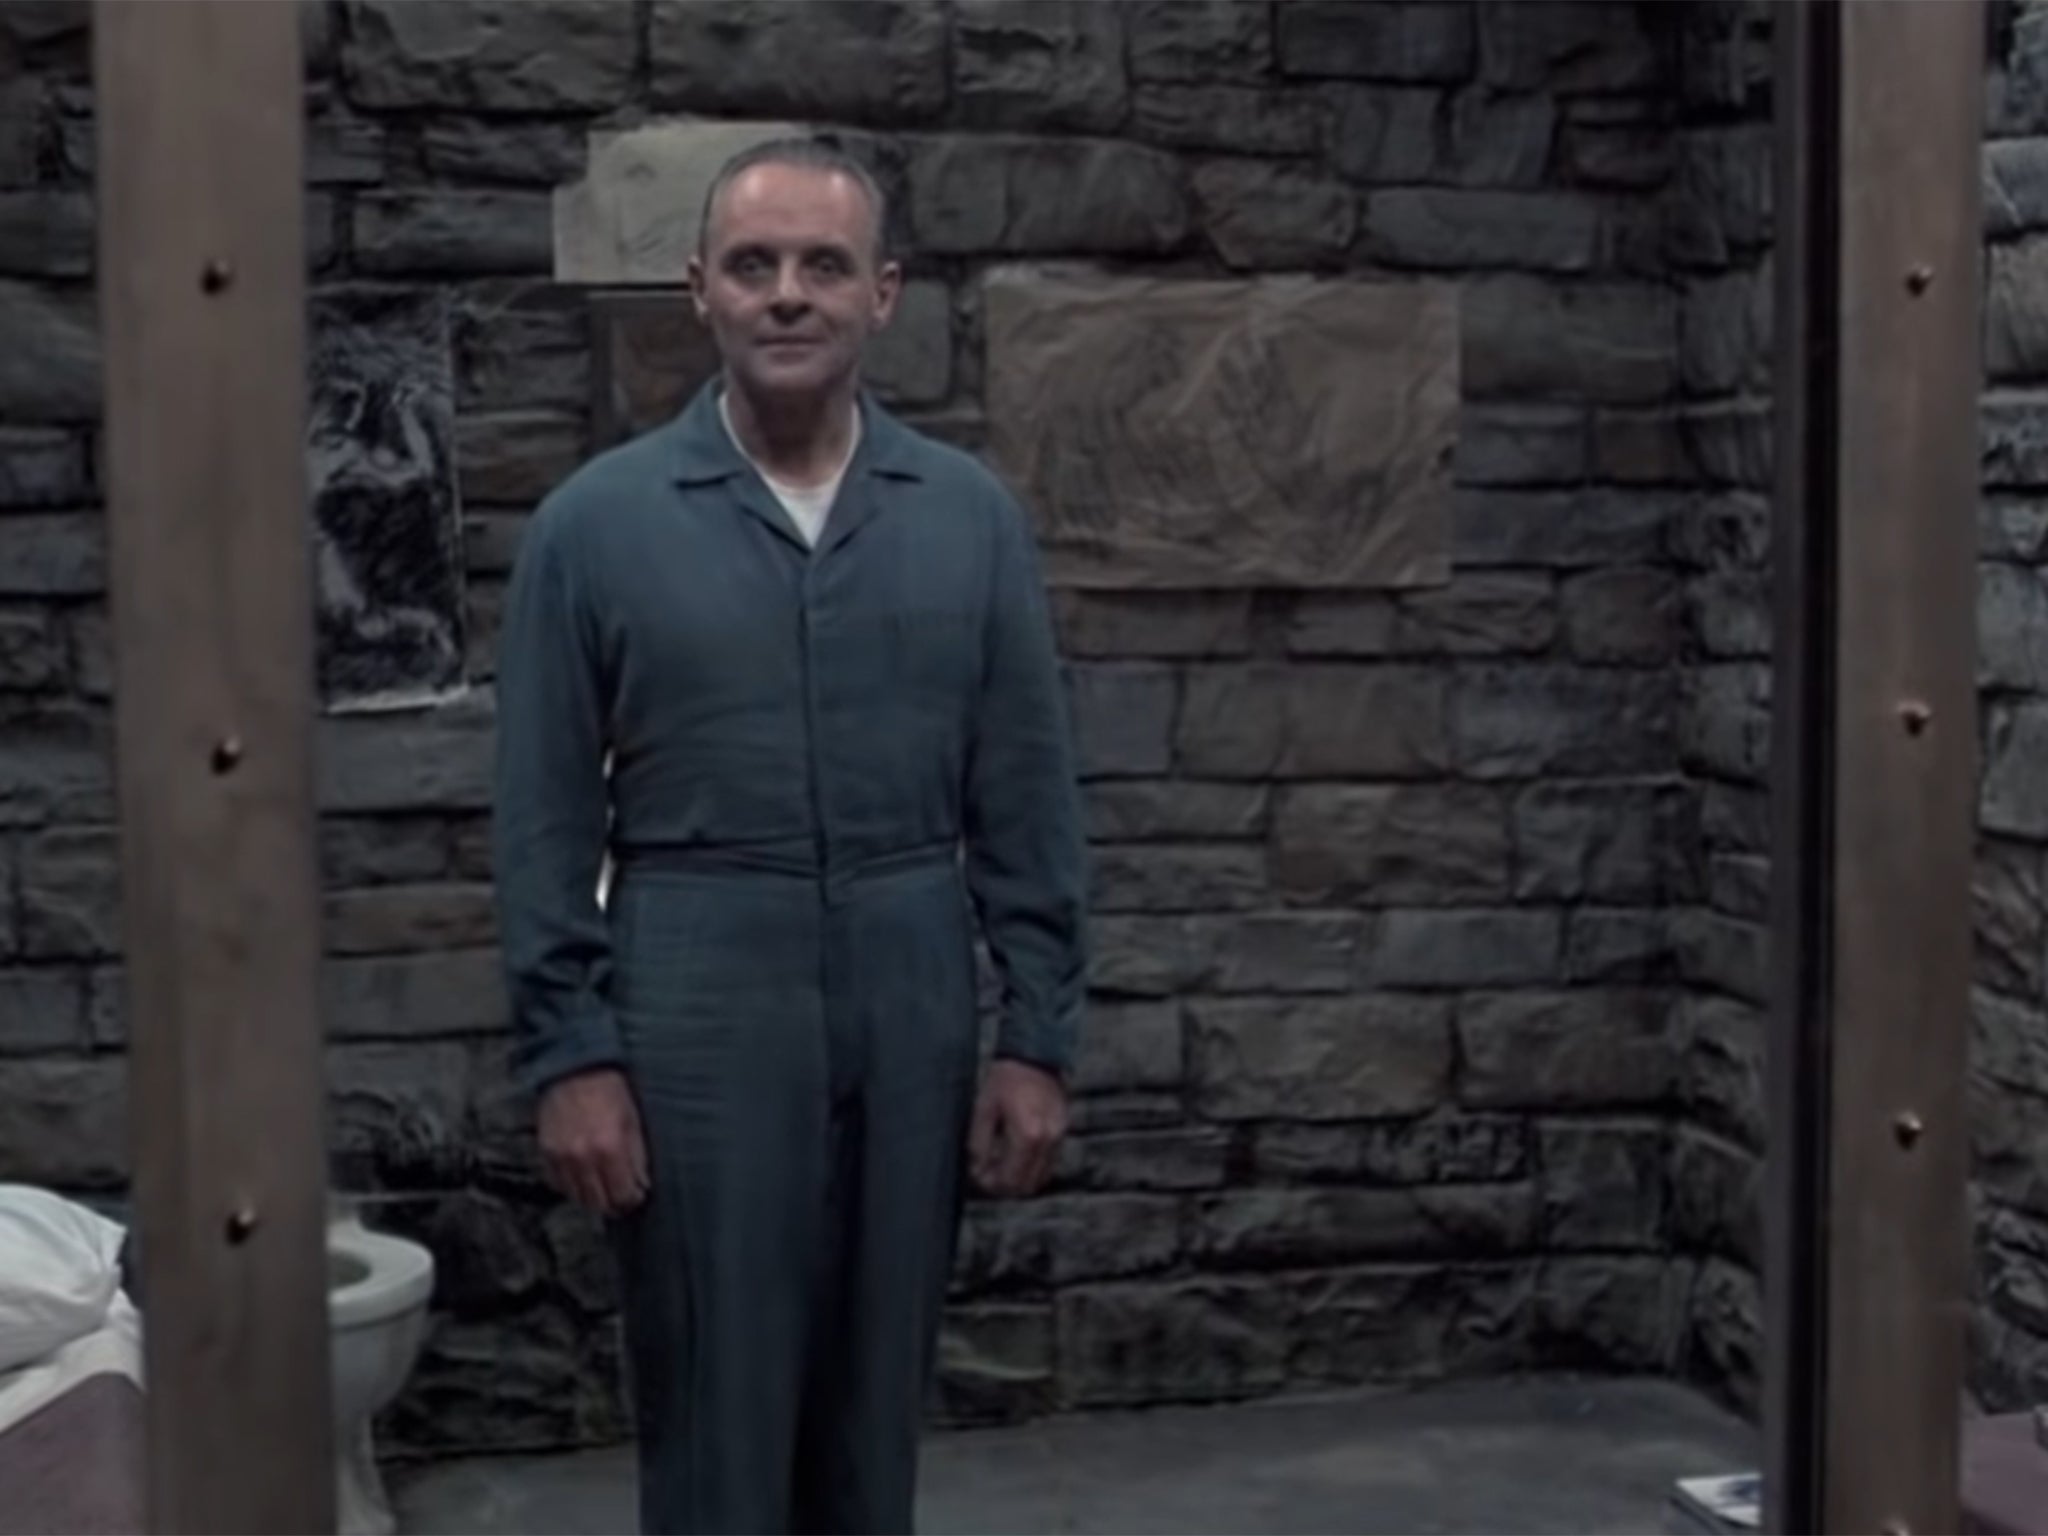 ‘The Silence of the Lambs’ raised questions about Lecter’s origin story, paving the way for a prequel